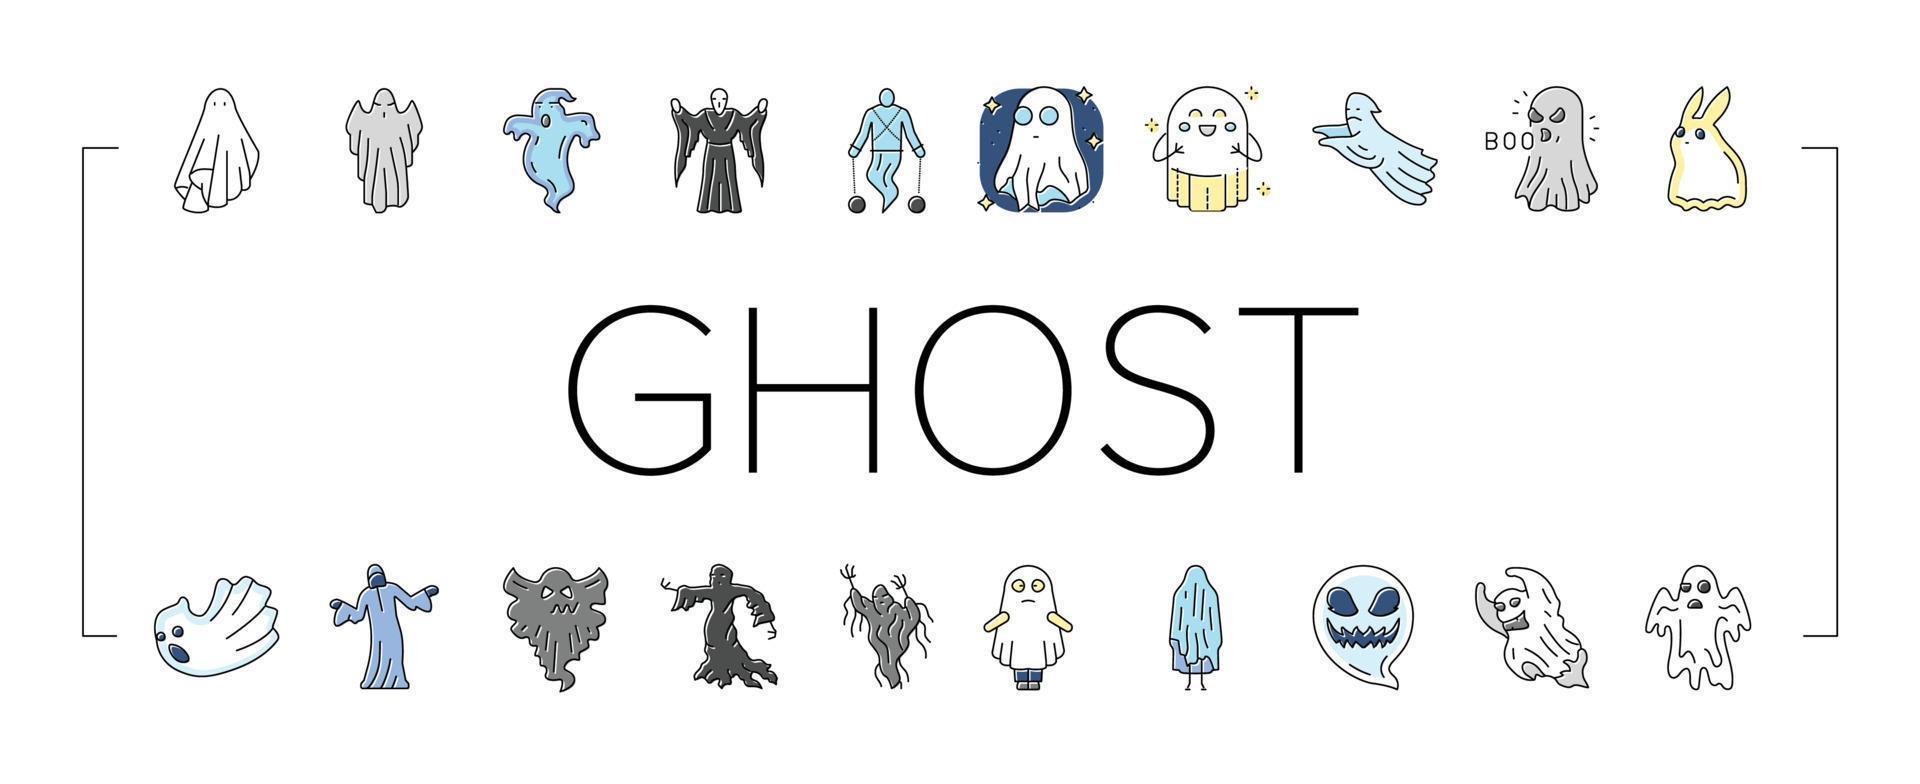 ghost halloween spooky scary cute icons set vector